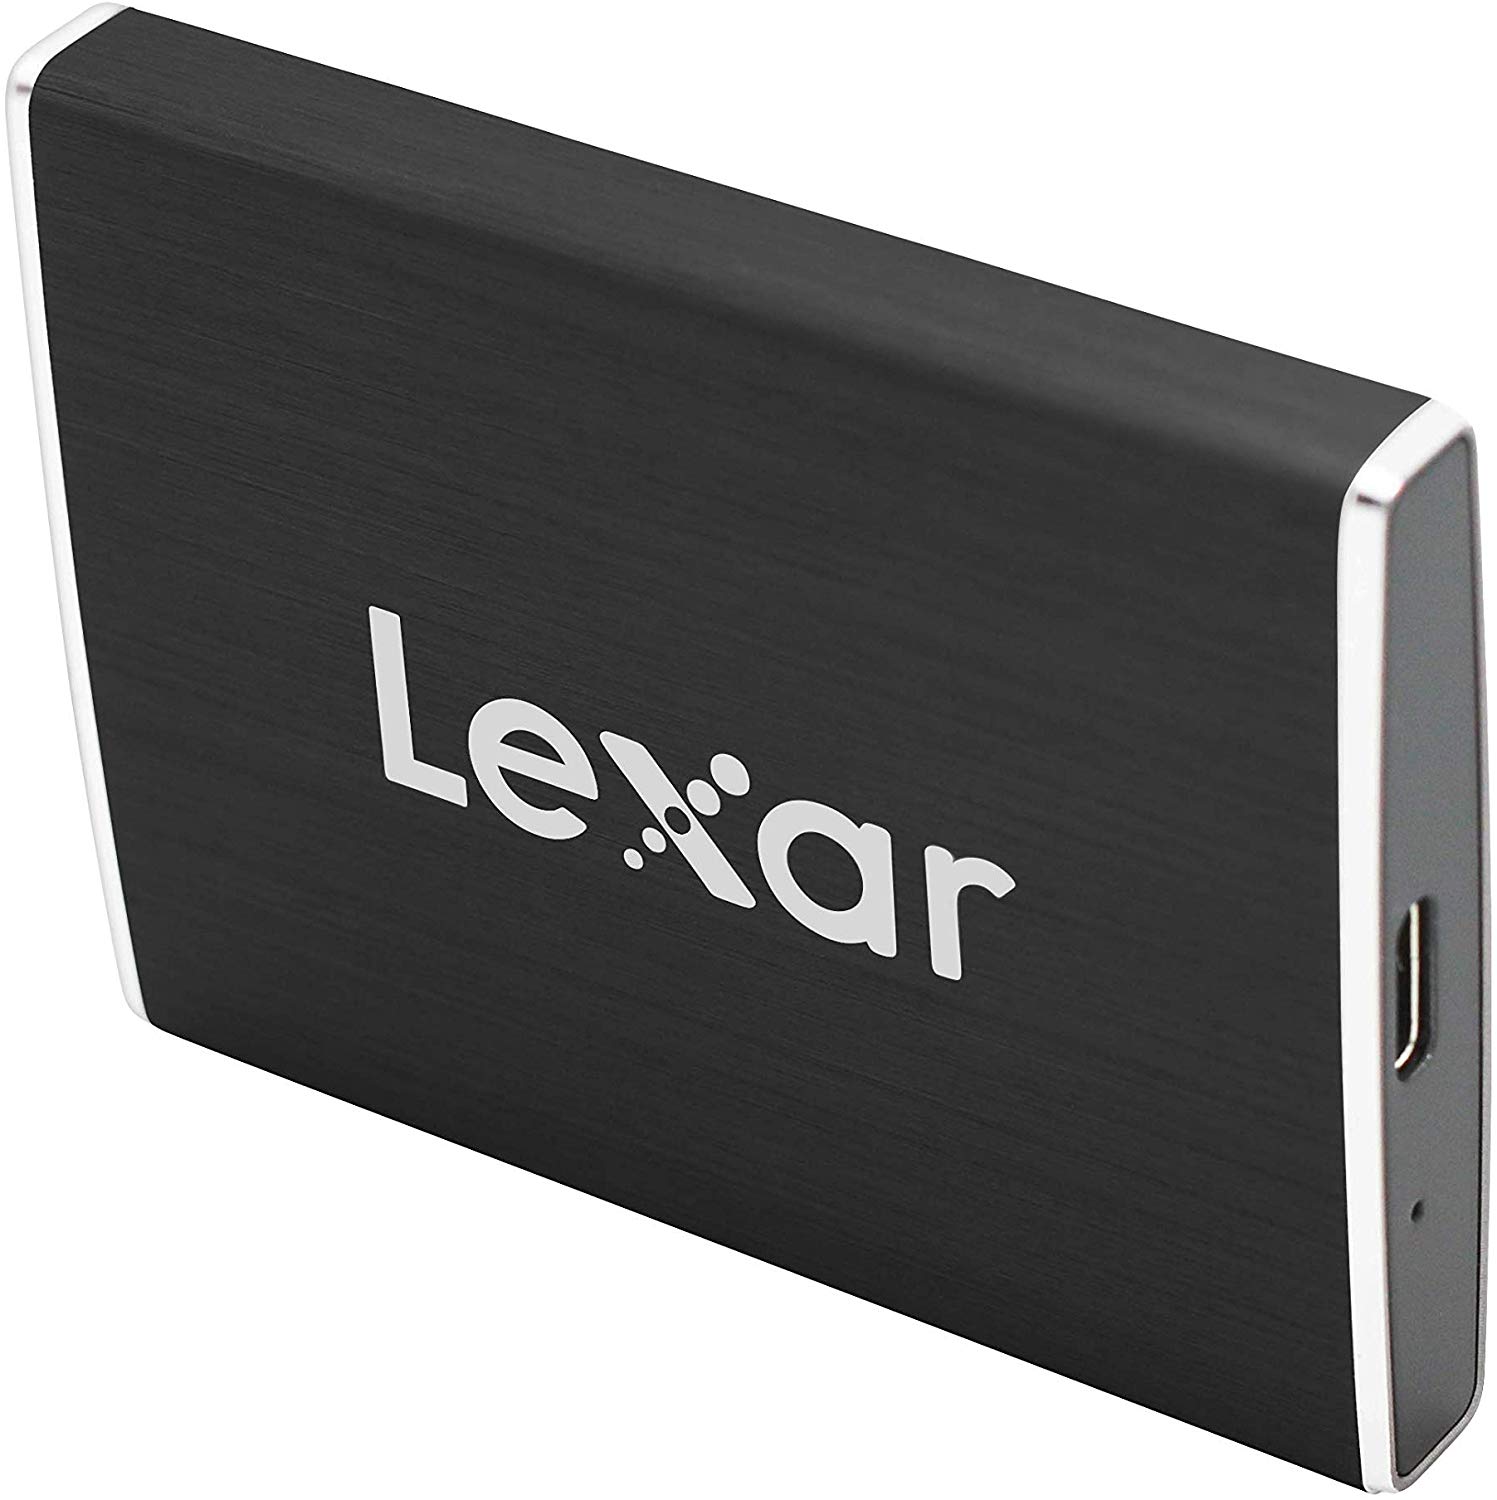 Lsl100p-500rb lexar® portable solid-state drives 500gb